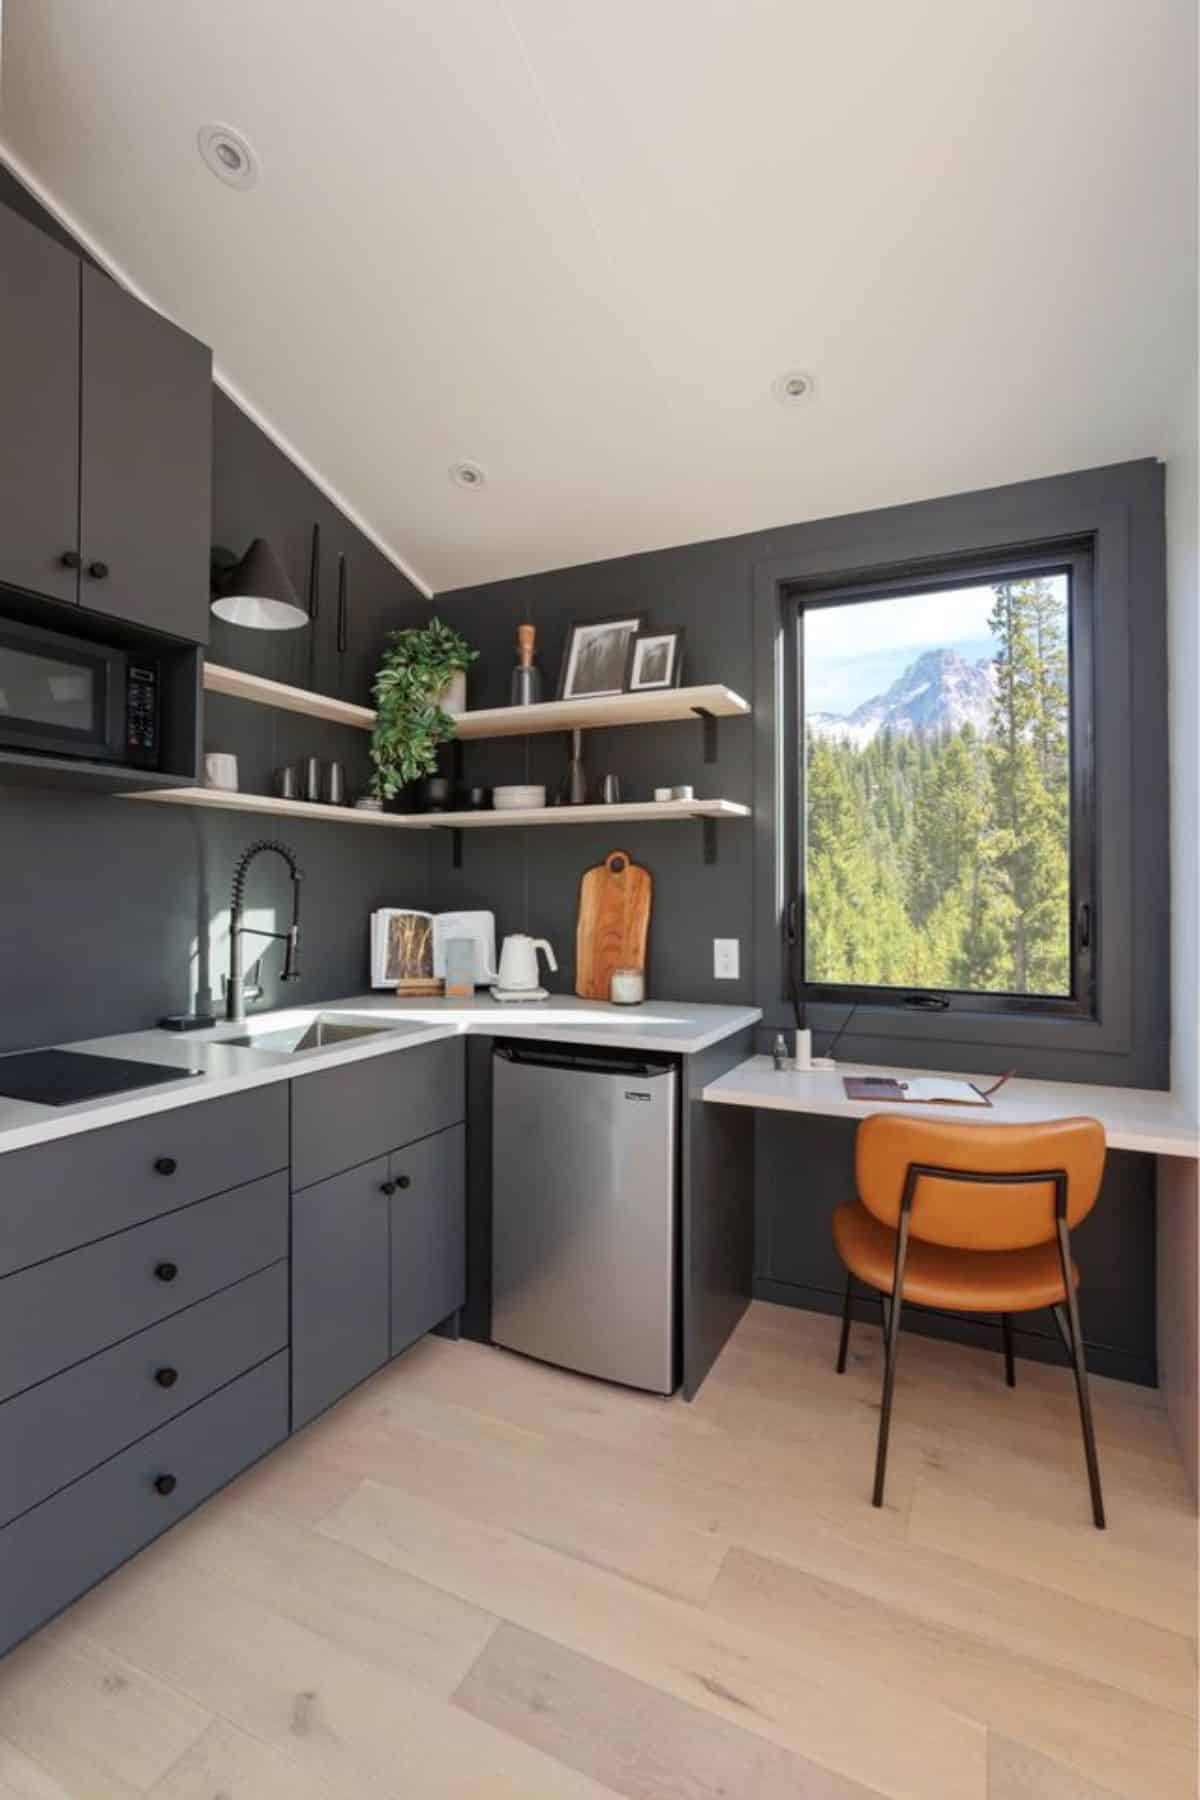 L shaped kitchen area plus separate dining cum workplace area of A-frame tiny home